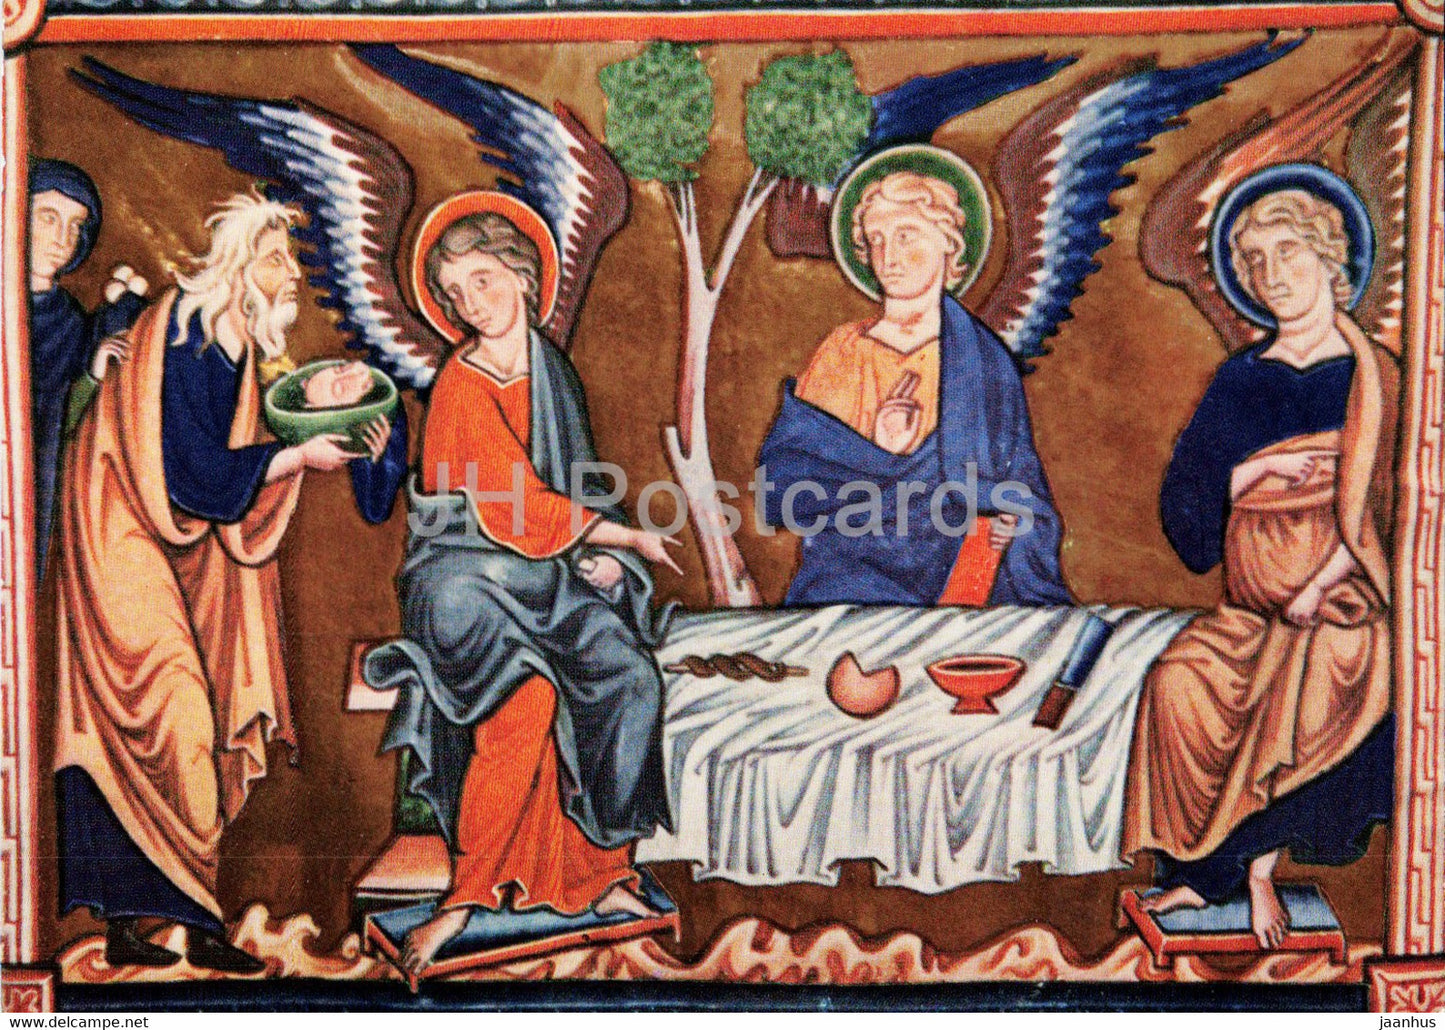 painting - Besuch der Drei Engel bei Abraham - Visit of the Three Angels to Abraham - art - Germany - unused - JH Postcards